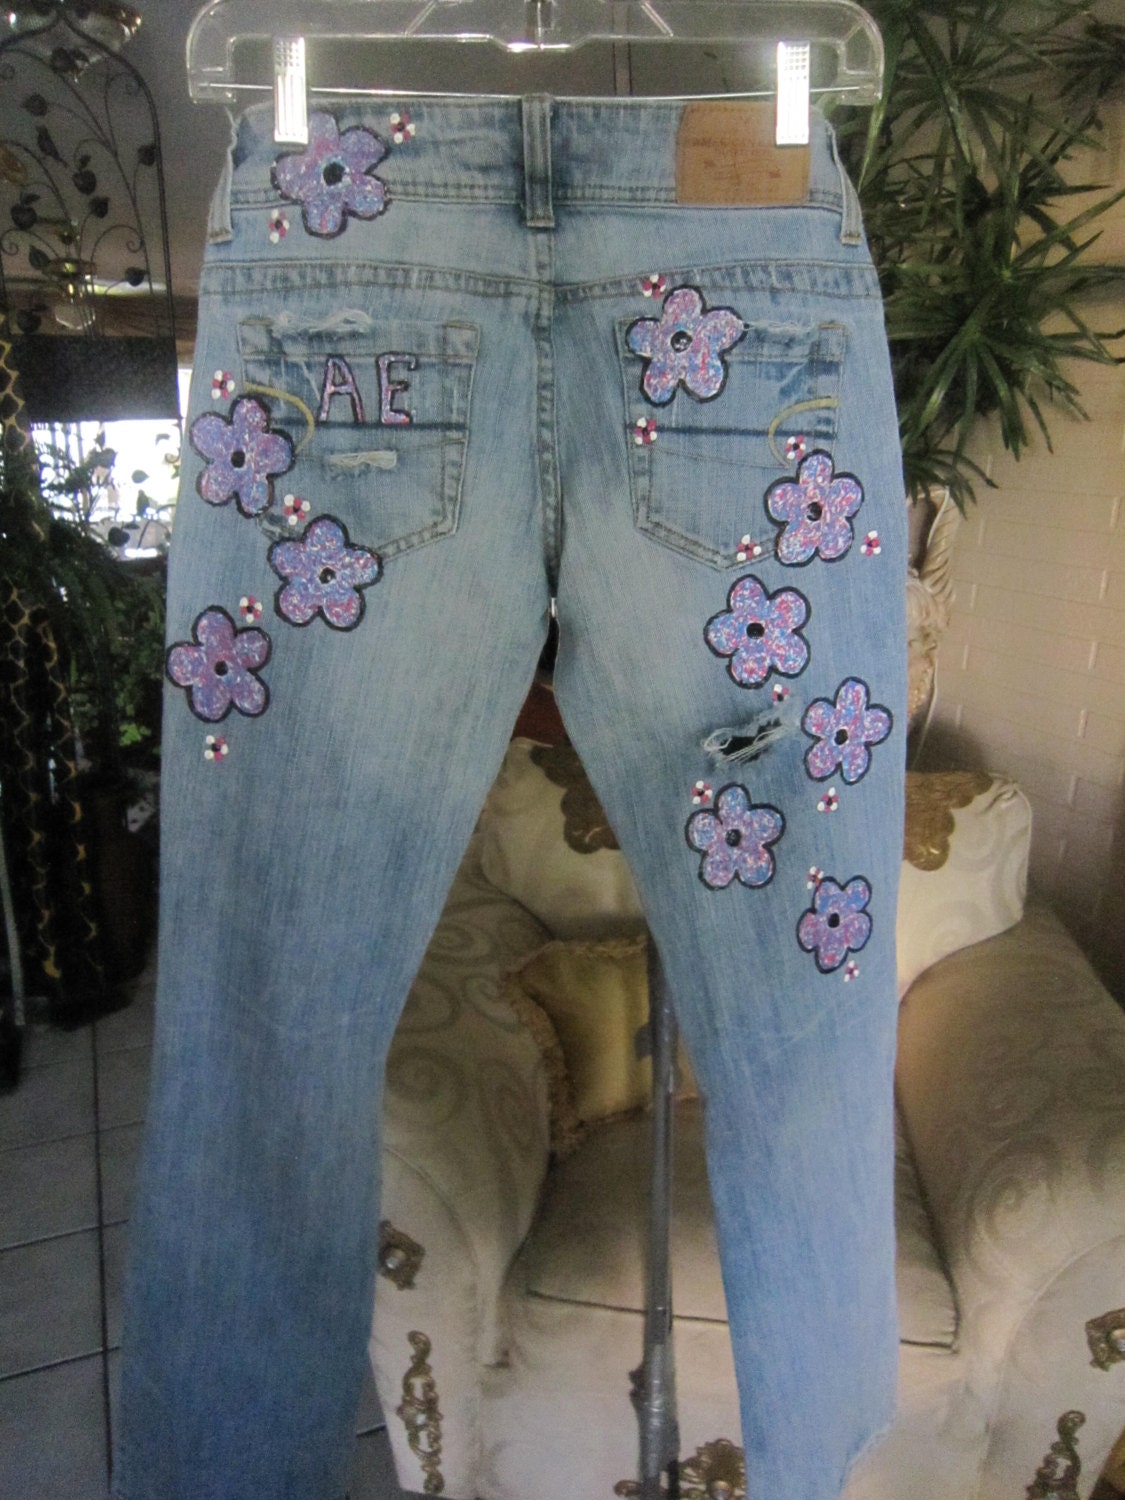 Bohemian Girl Hippie Peace Love Painted Jeans Shabby Chic - Etsy